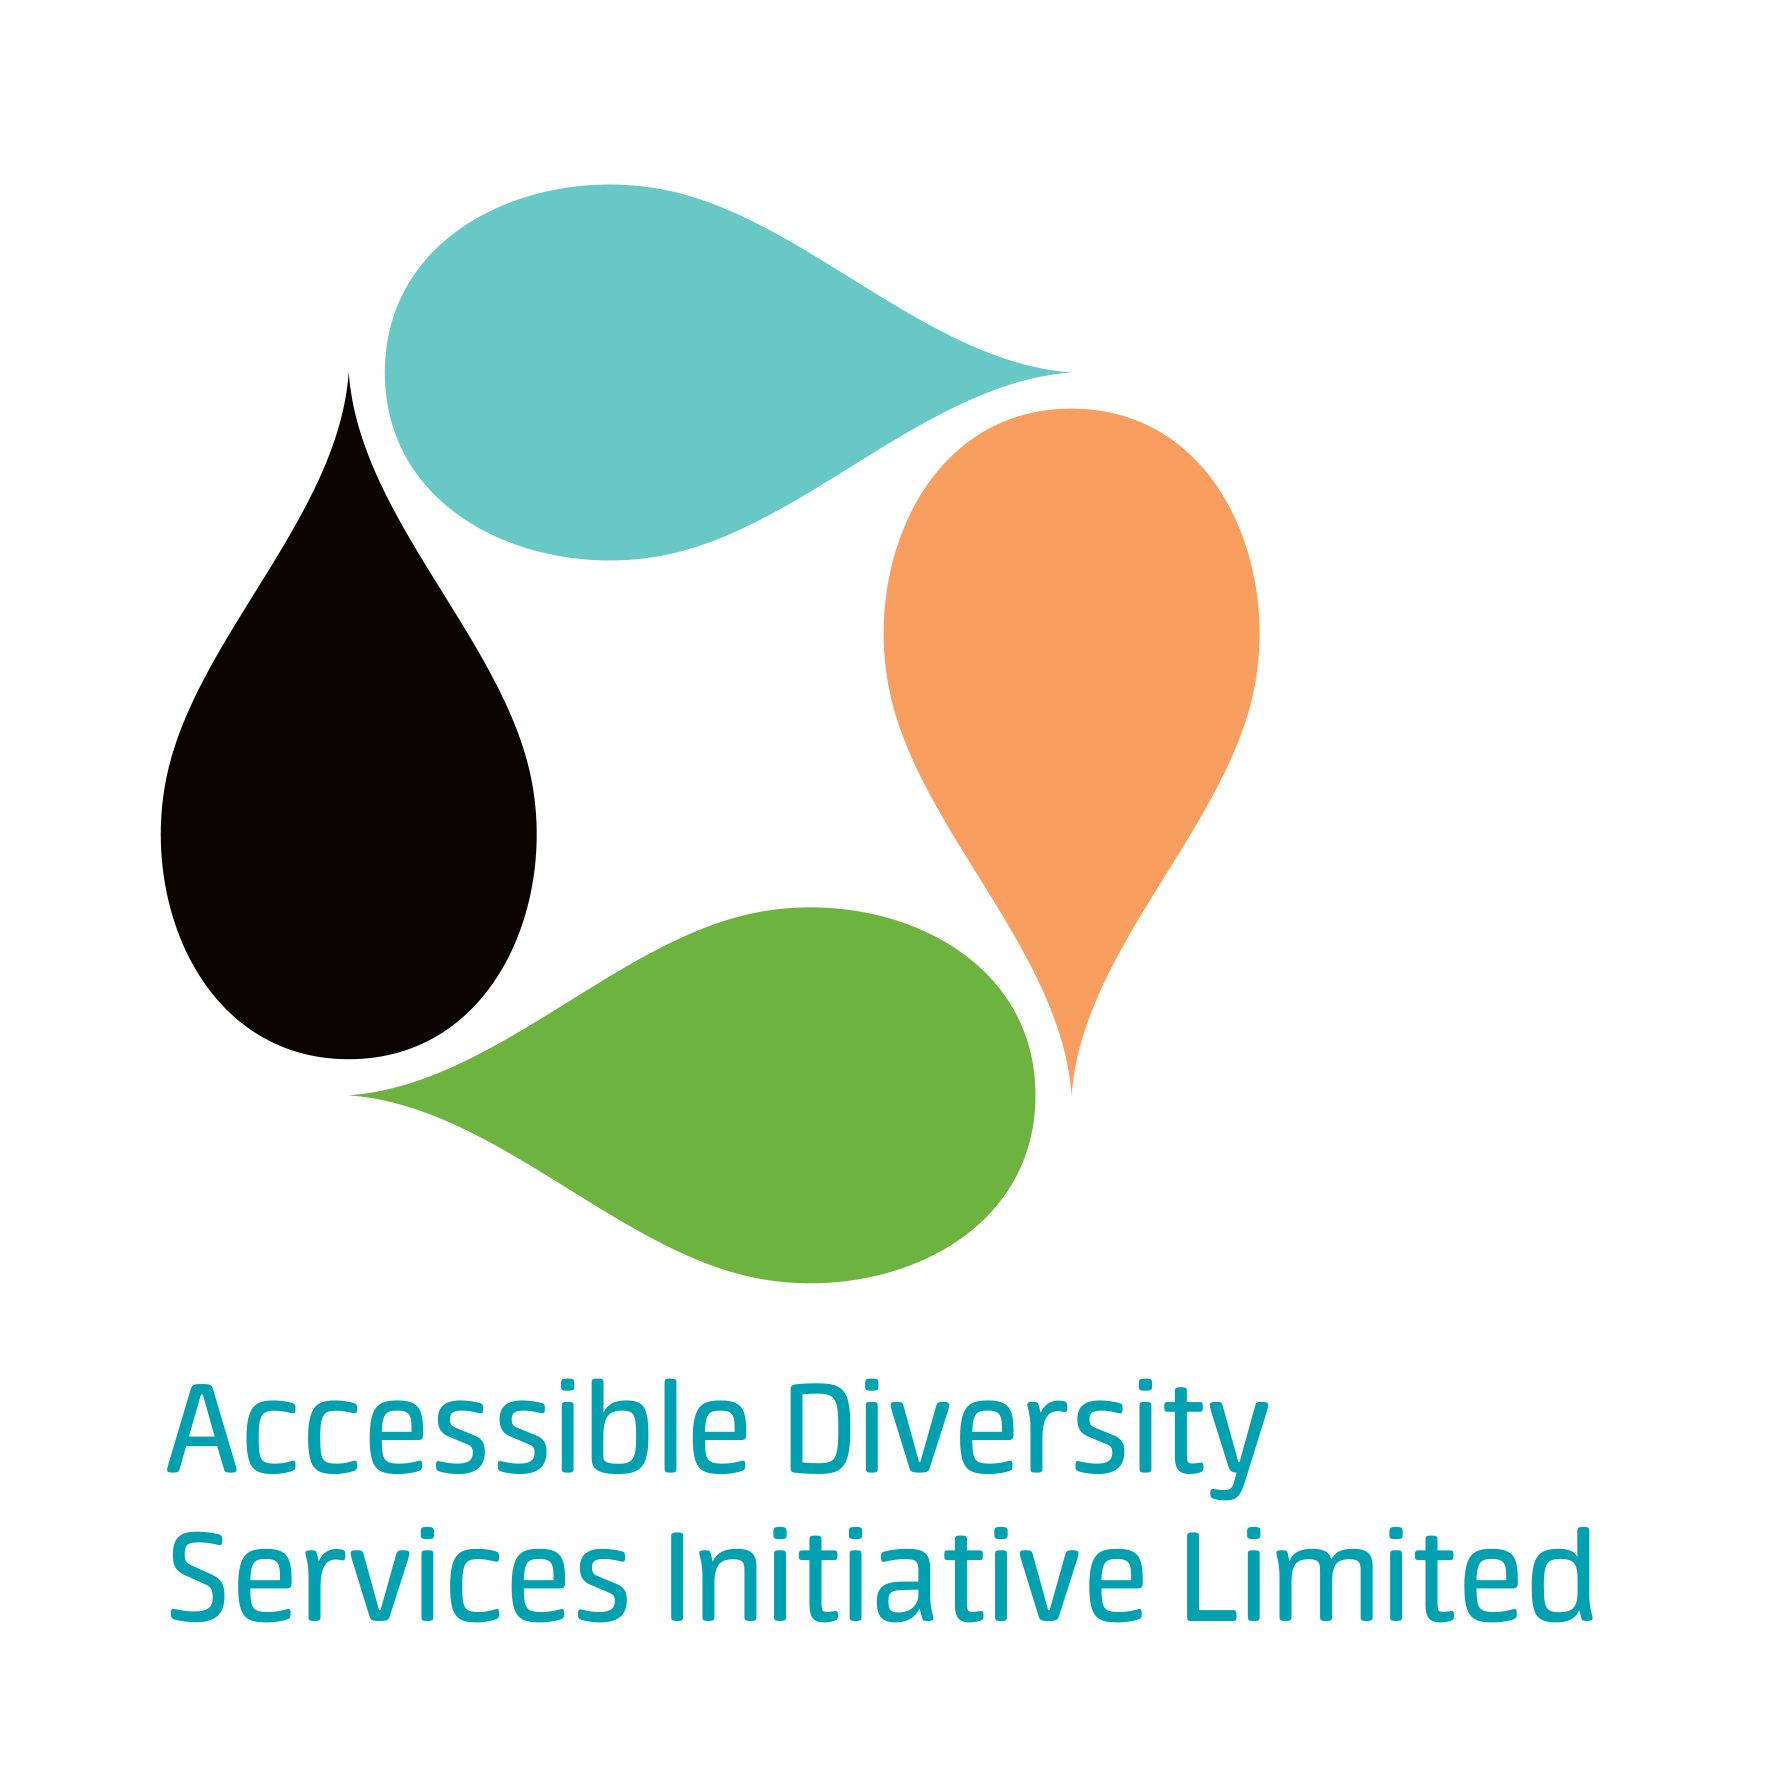 Accessible Diversity Services Initiative Limited